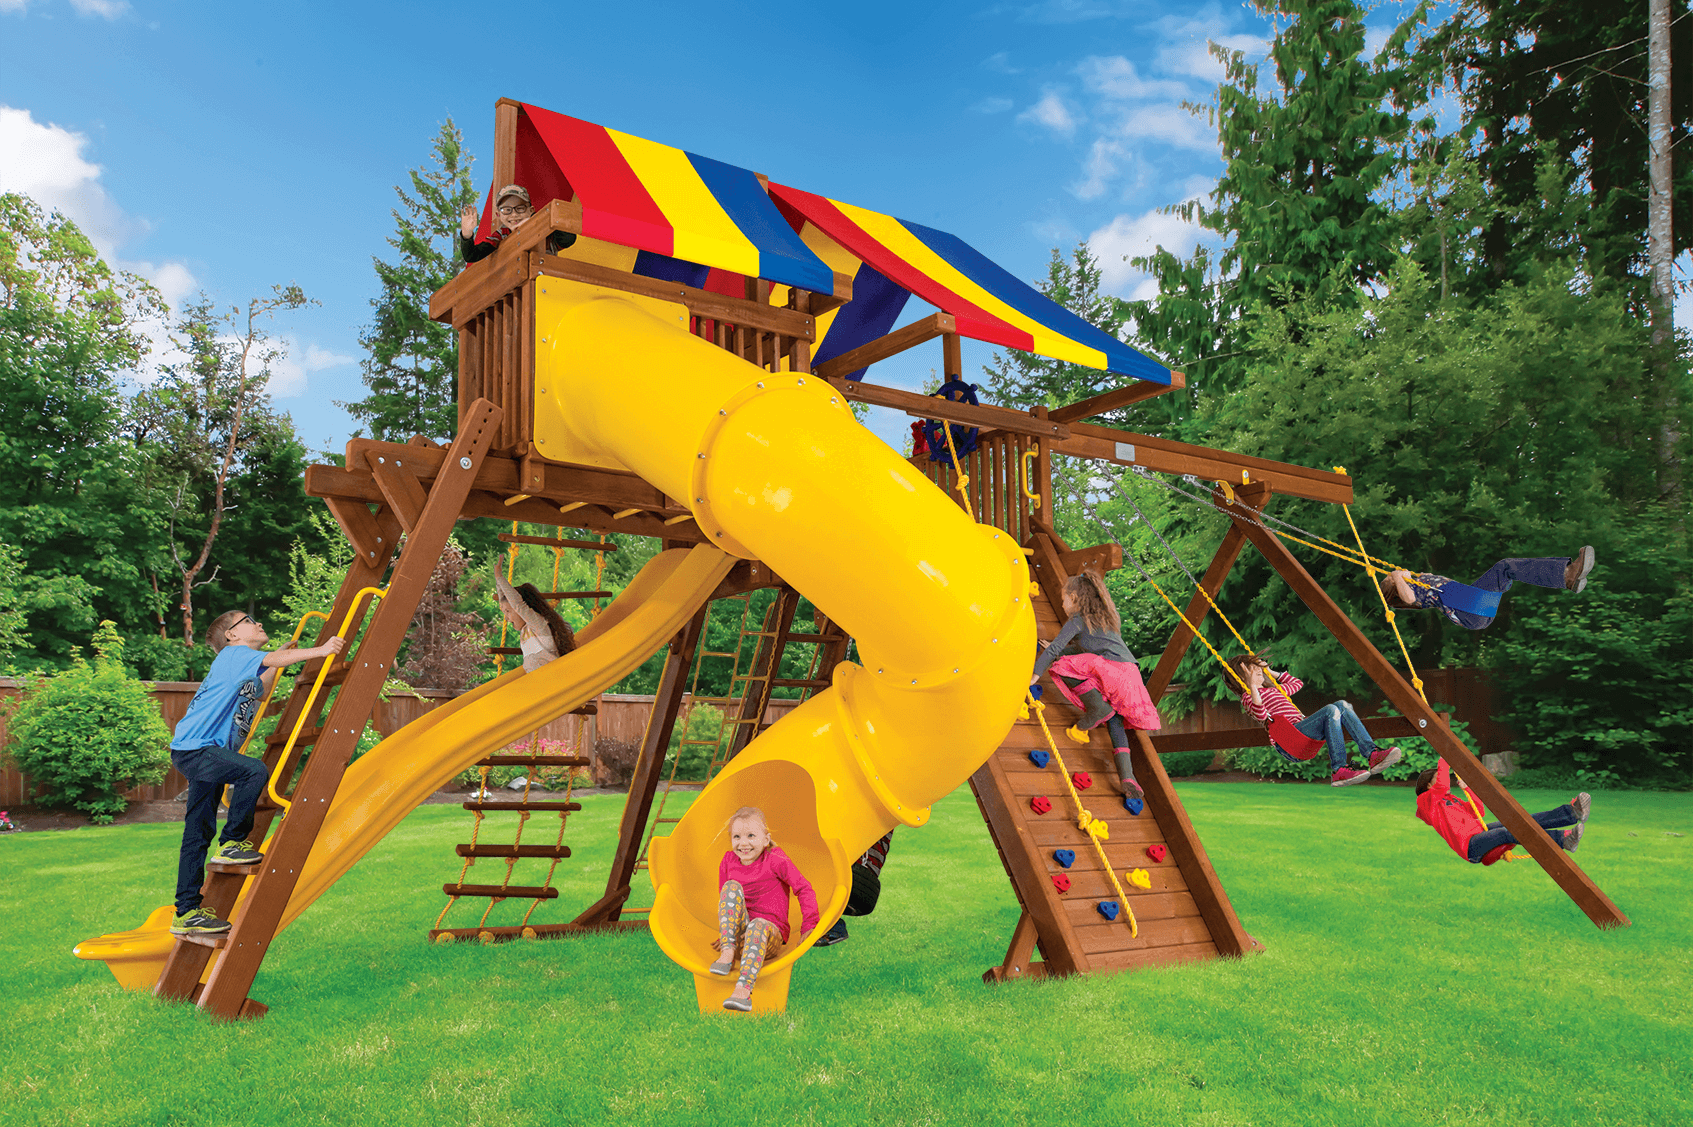 King Kong Base Castle Pkg V with 270° Spiral Slide (25E) - Rainbow Play Systems of Texas